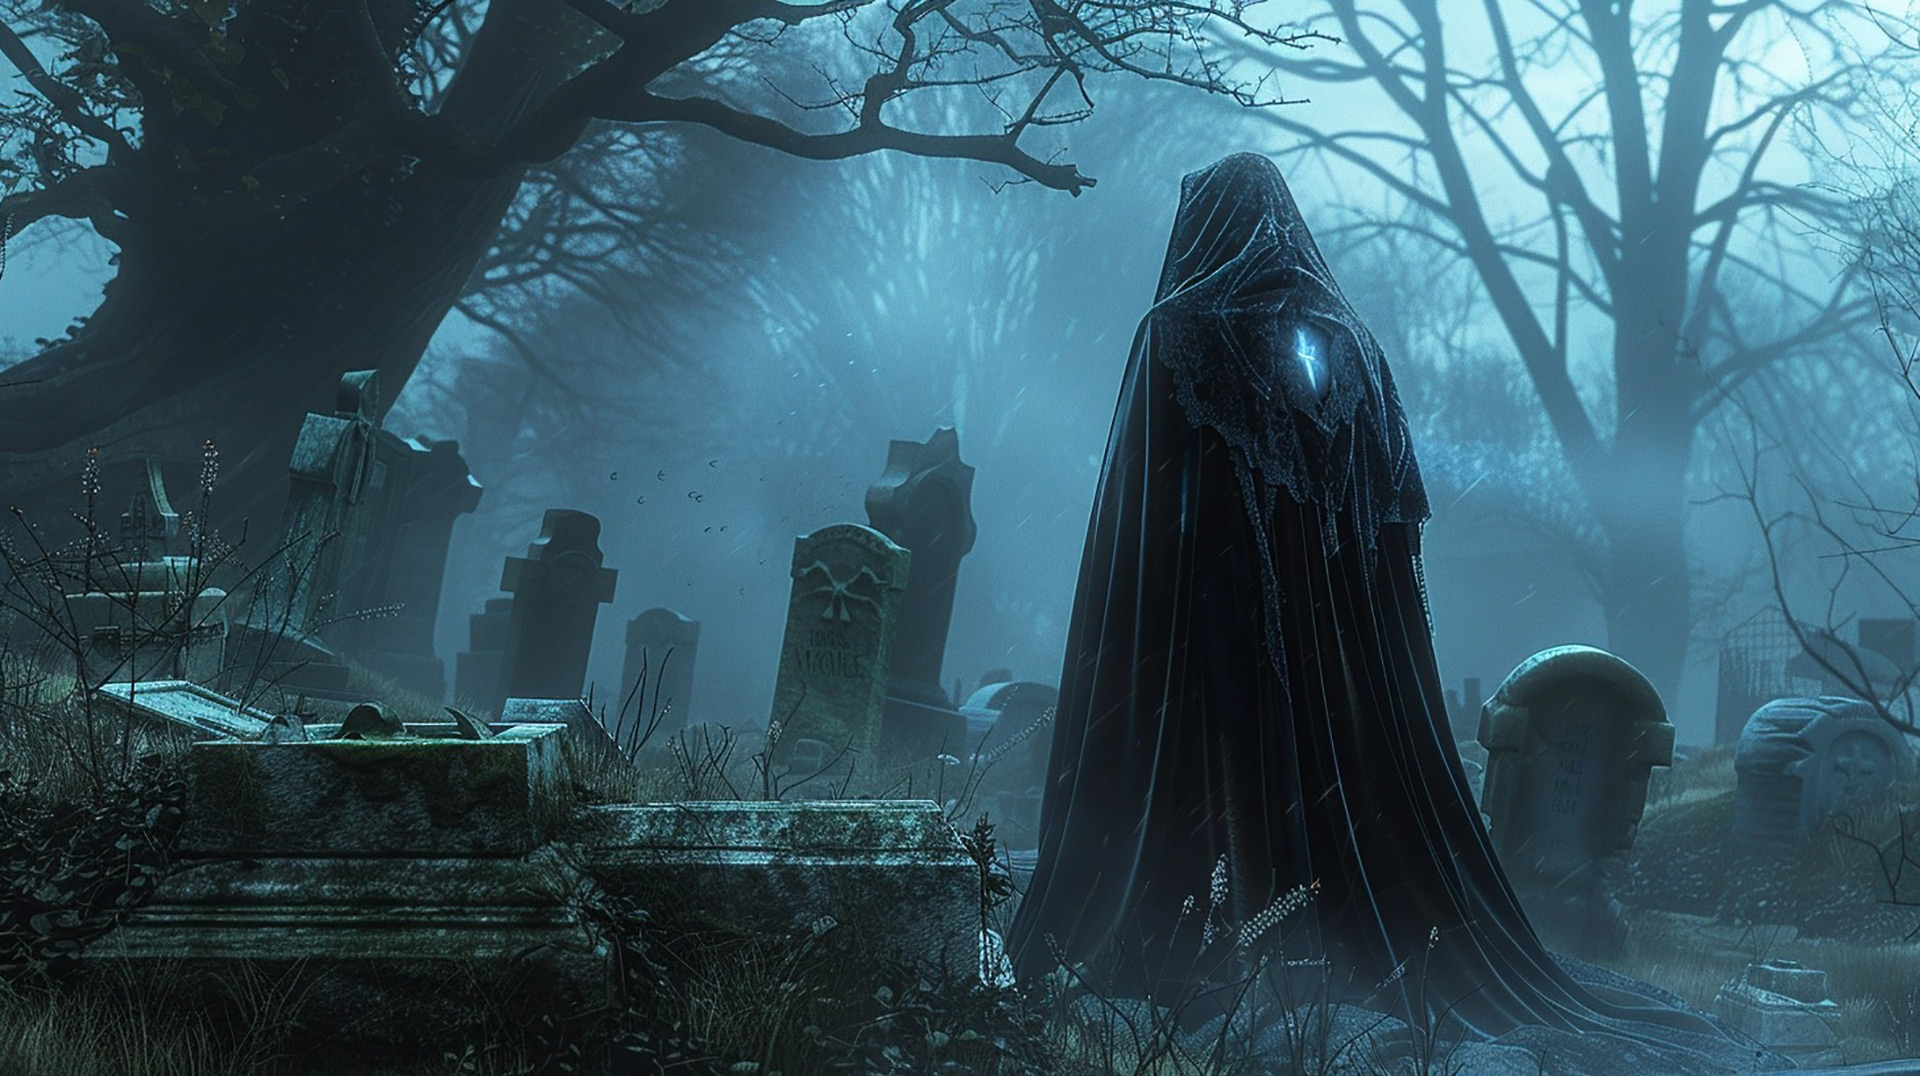 Whispers Among the Stones: Mysterious Cemetery Backgrounds in 1920x1080